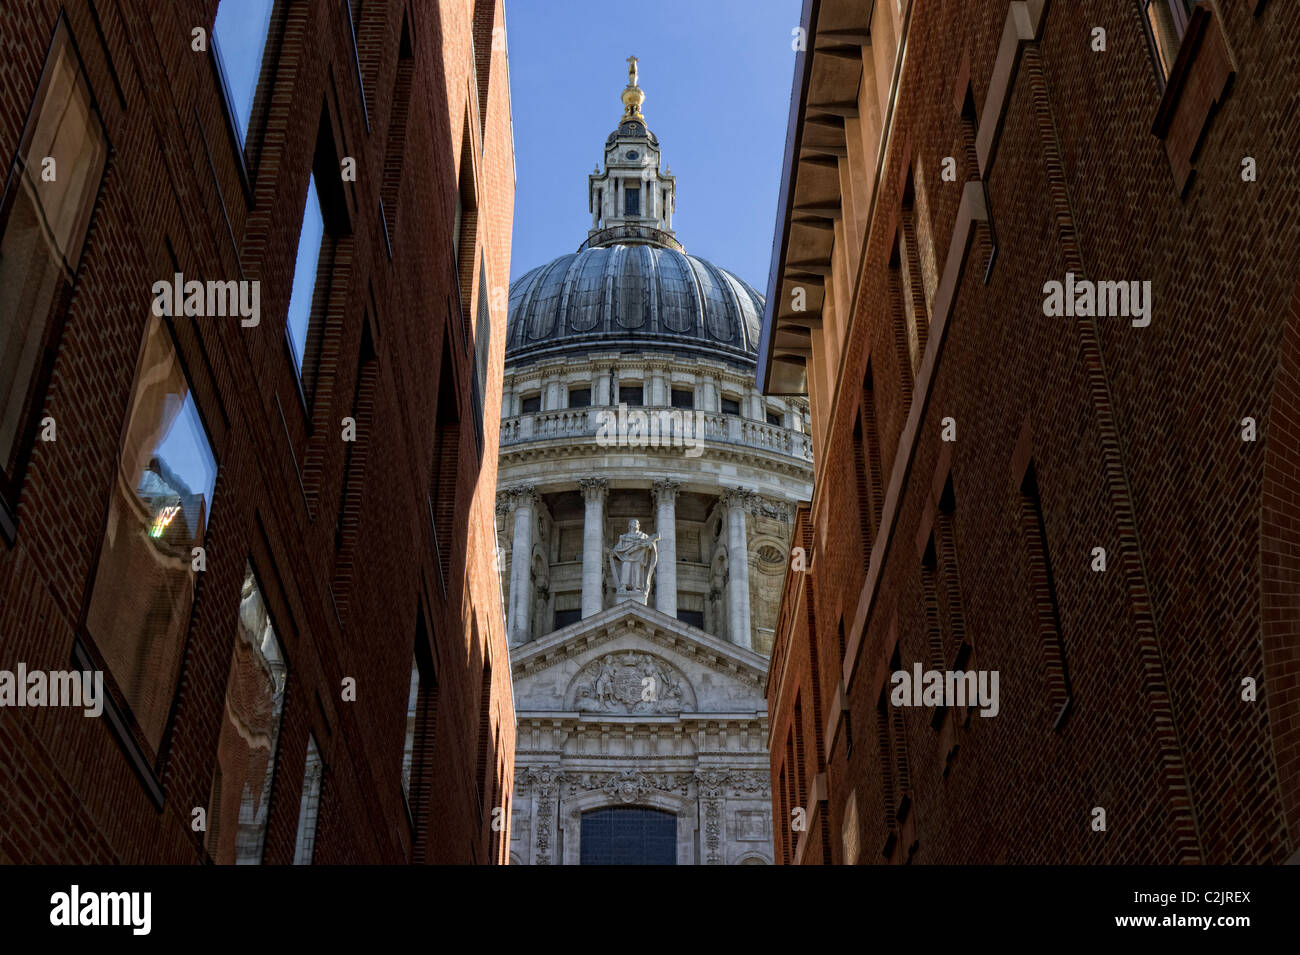 St. Paul's Cathedral dome seen between two buildings, London, England, UK Stock Photo